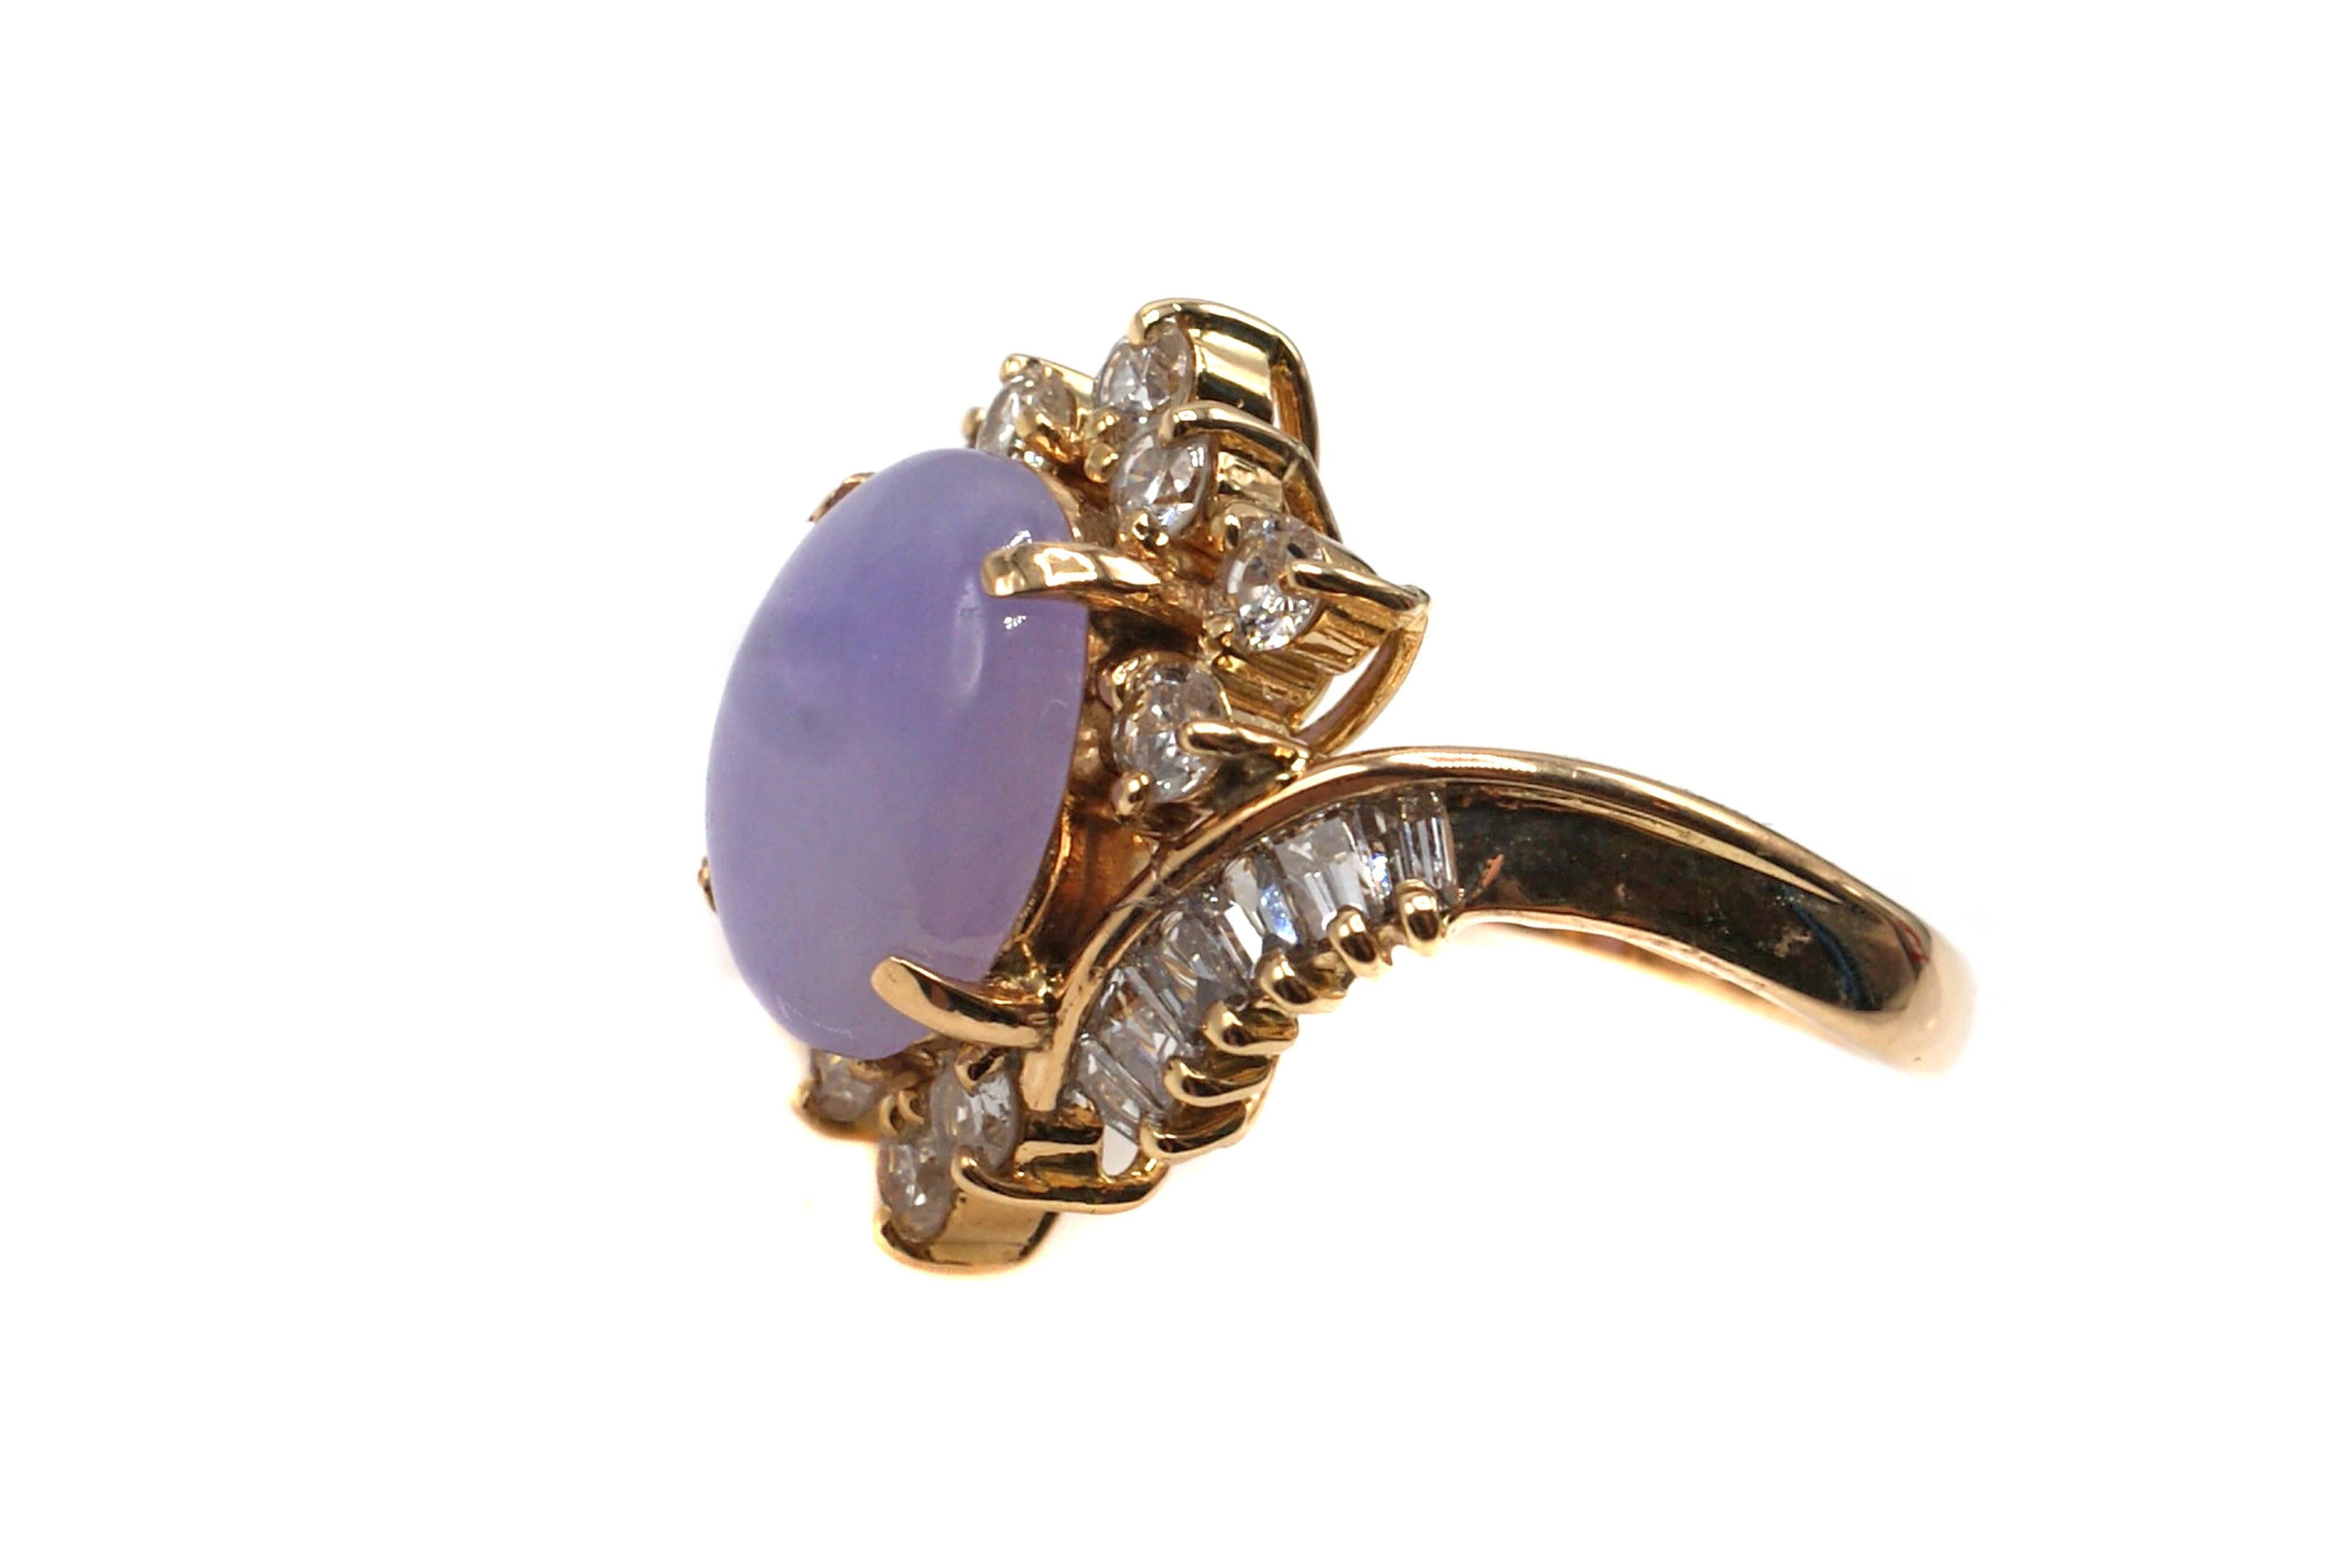 A beautiful lilac color oval lavender jade cabochon is centrally set in this well handcrafted 1960s ring. The jade is measured to weigh approximately 3 carats and  surrounding the jade are 10 bright white and sparkly round brilliant cut diamonds and